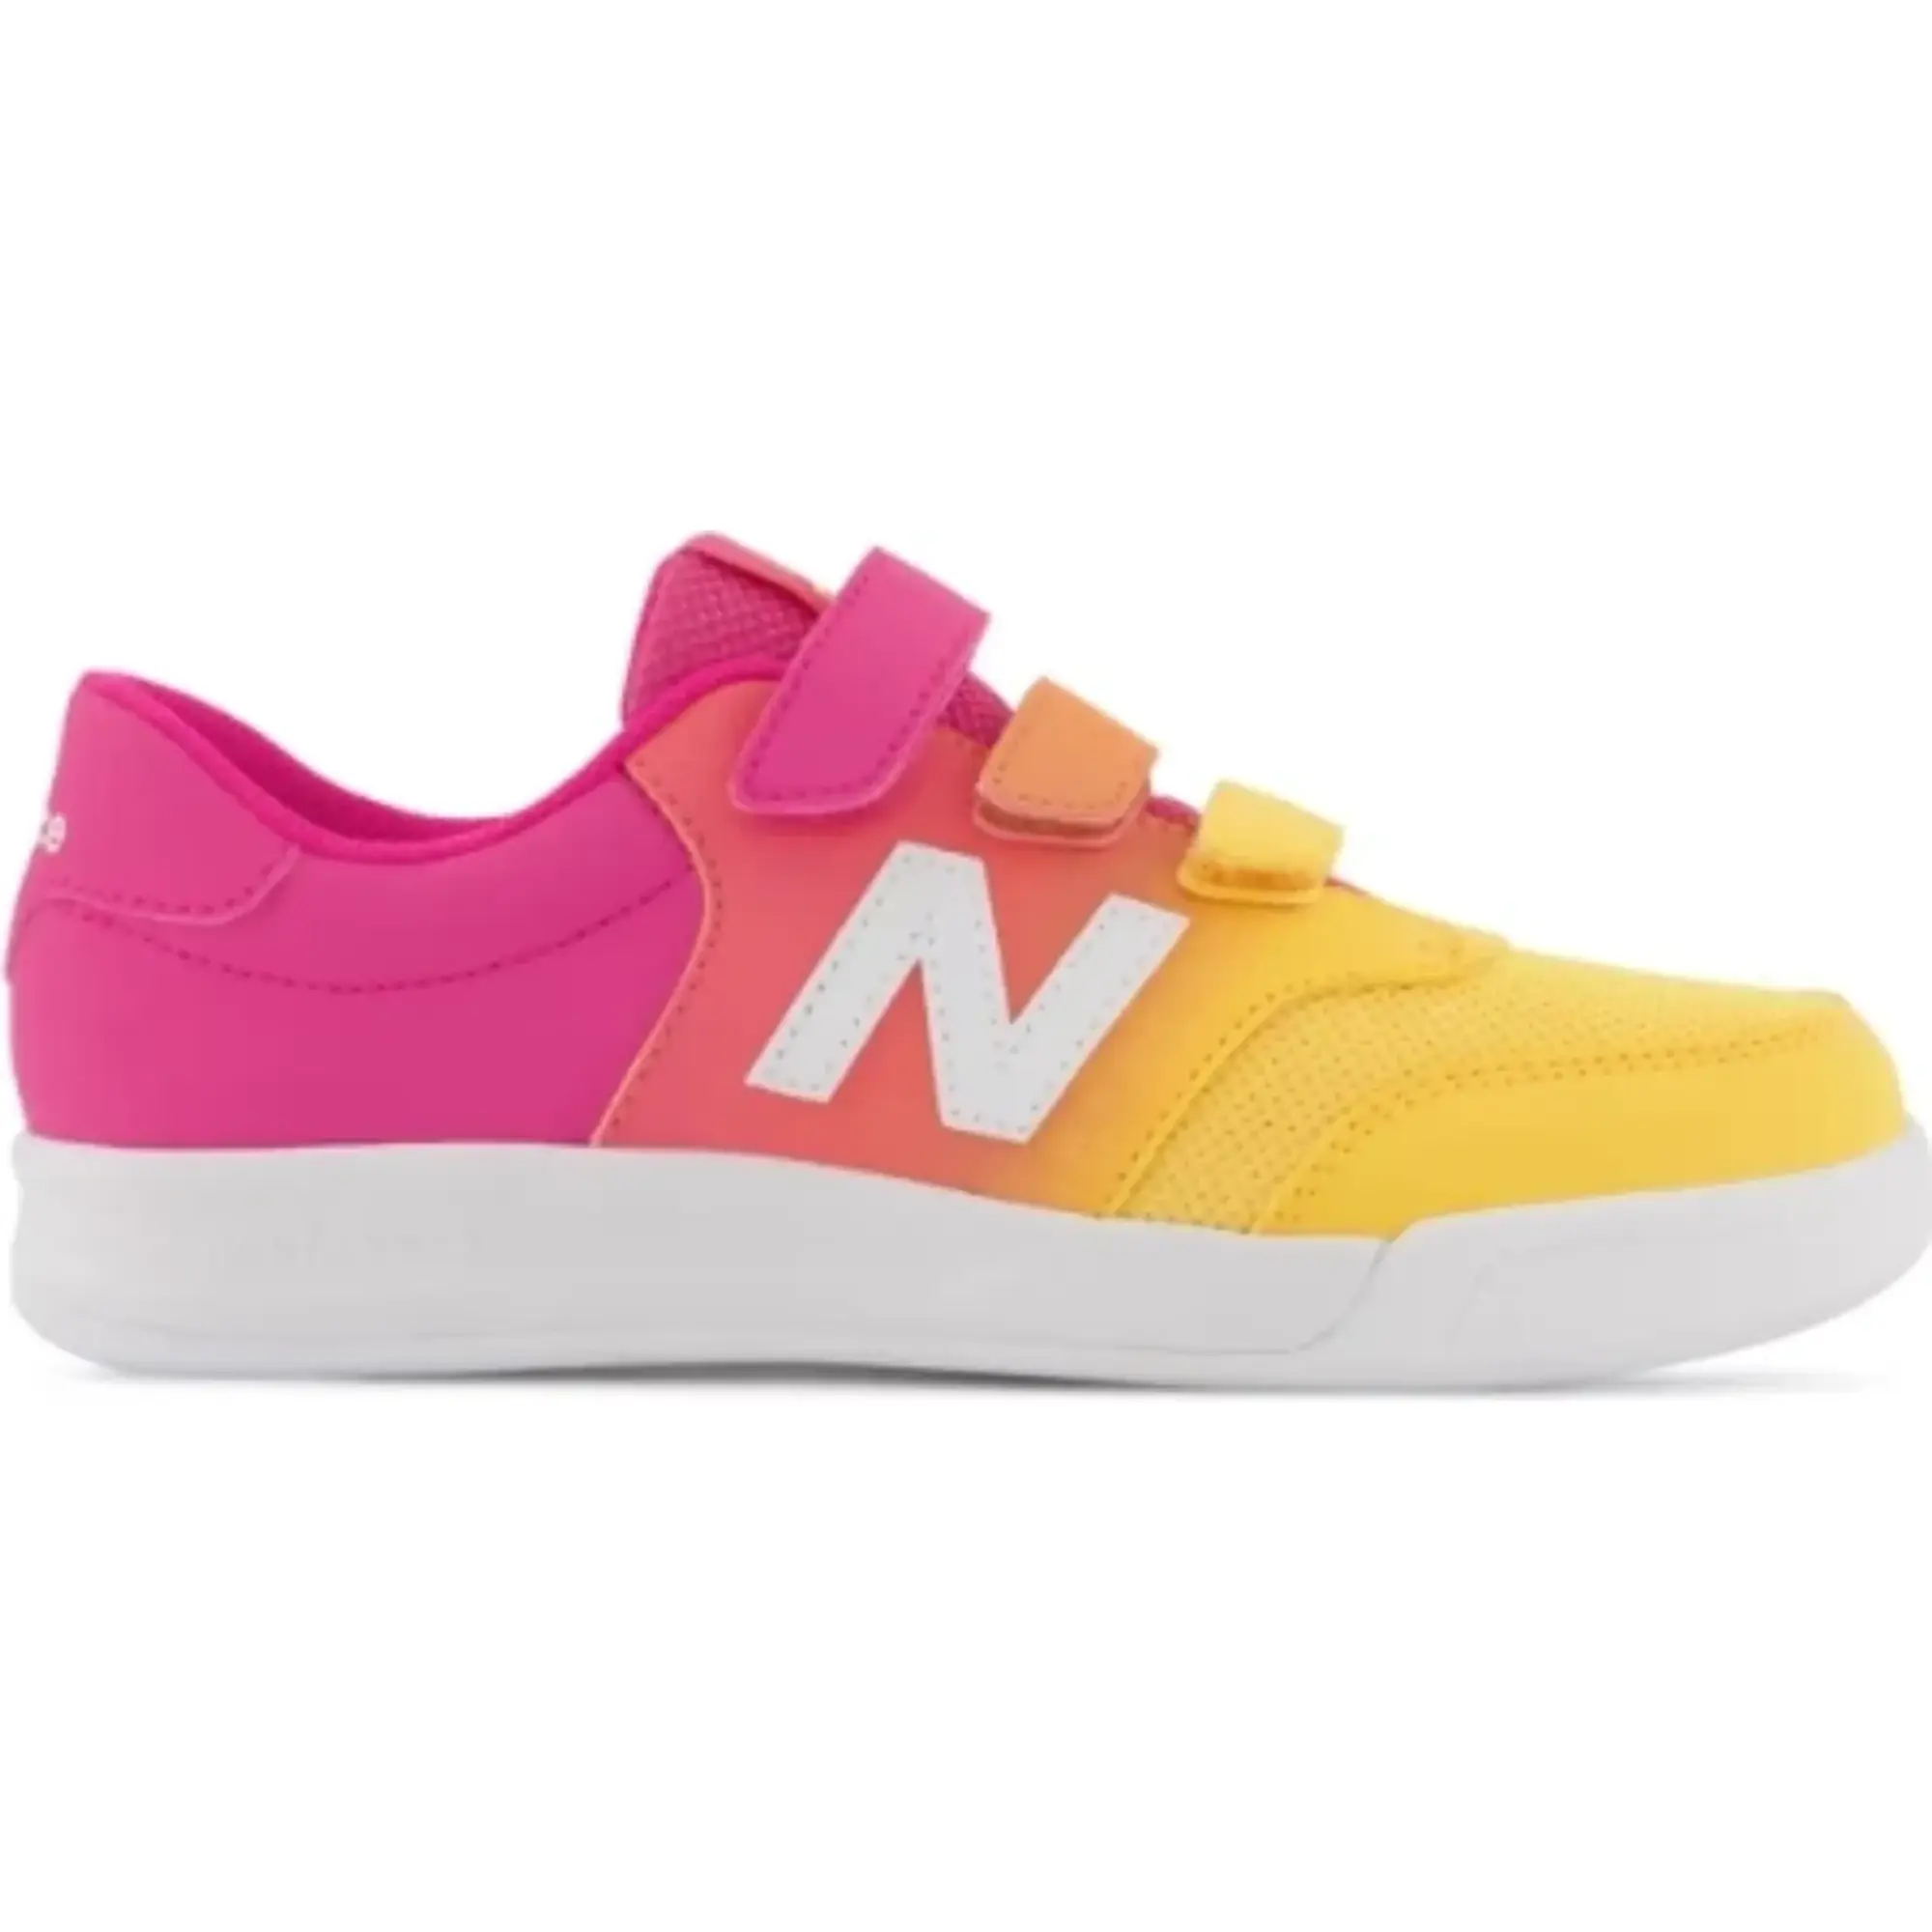 New Balance Kids' CT60 in Pink/Orange Synthetic